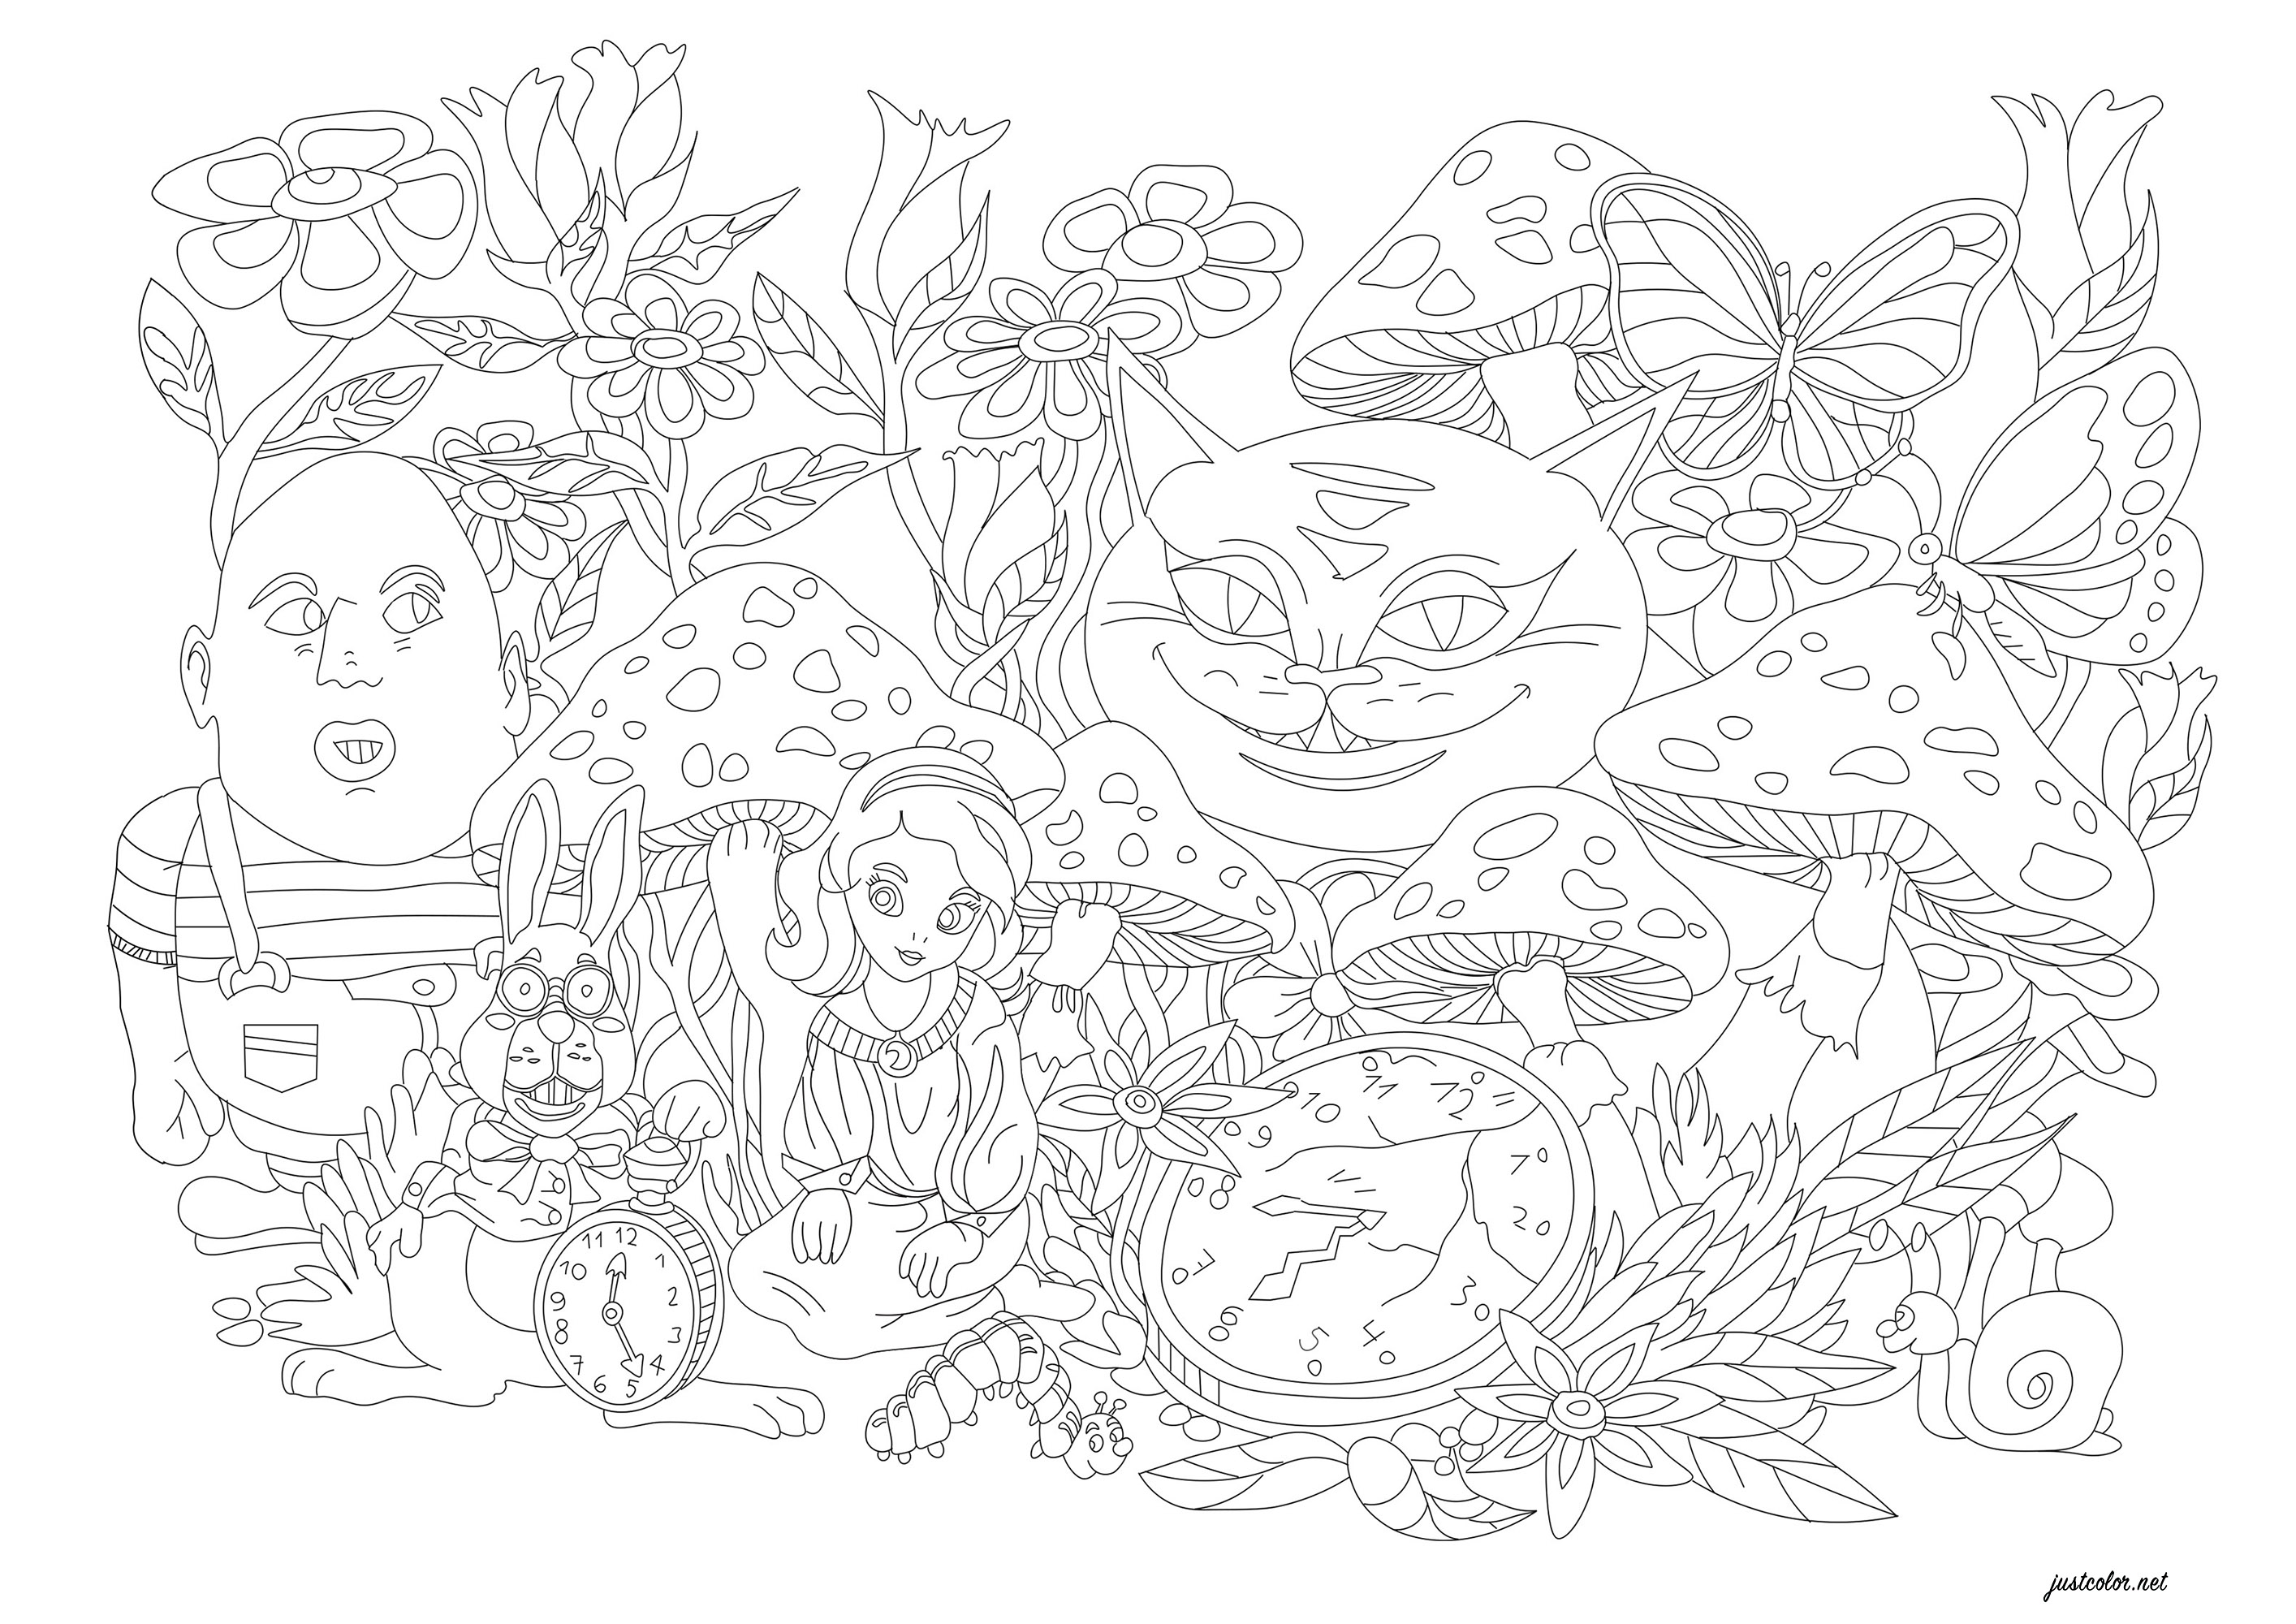 An illustration in reference to the book 'Alice's Adventures in Wonderland'.  This is an English novel published in 1865 by Lewis Carroll. With this drawing, you can color fantastic flowers, monsters, the rabbit, watches, a snail, butterflies and the marvelous Alice.